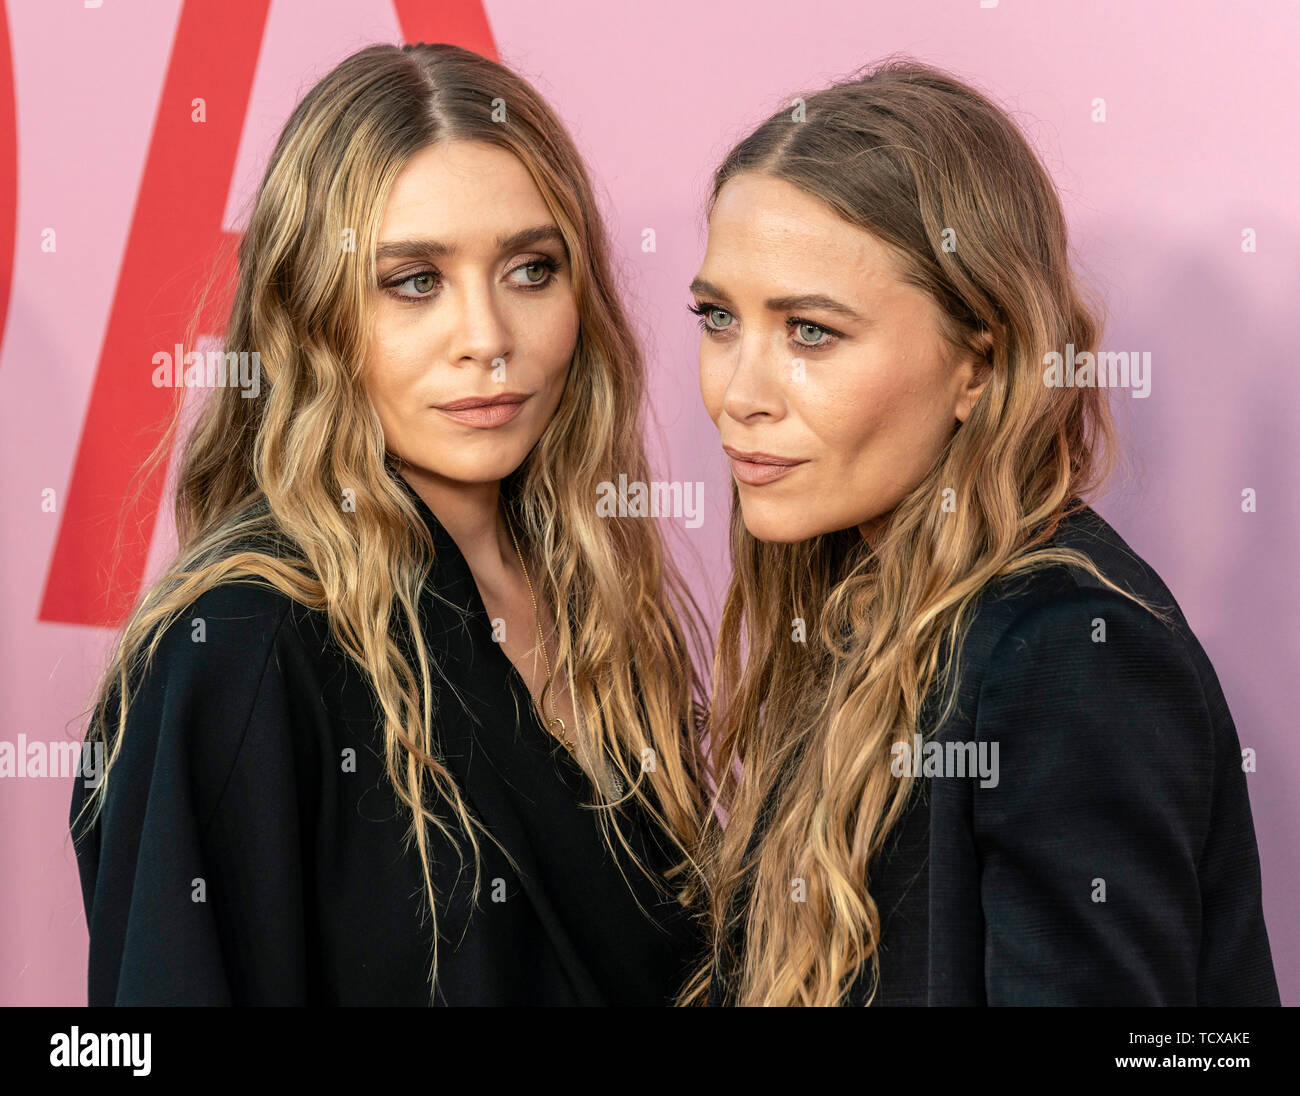 New York, NY - 03 juin, 2019 : Ashley et Mary-Kate Olsen assister 2019 CFDA Fashion Awards au Brooklyn Museum Banque D'Images